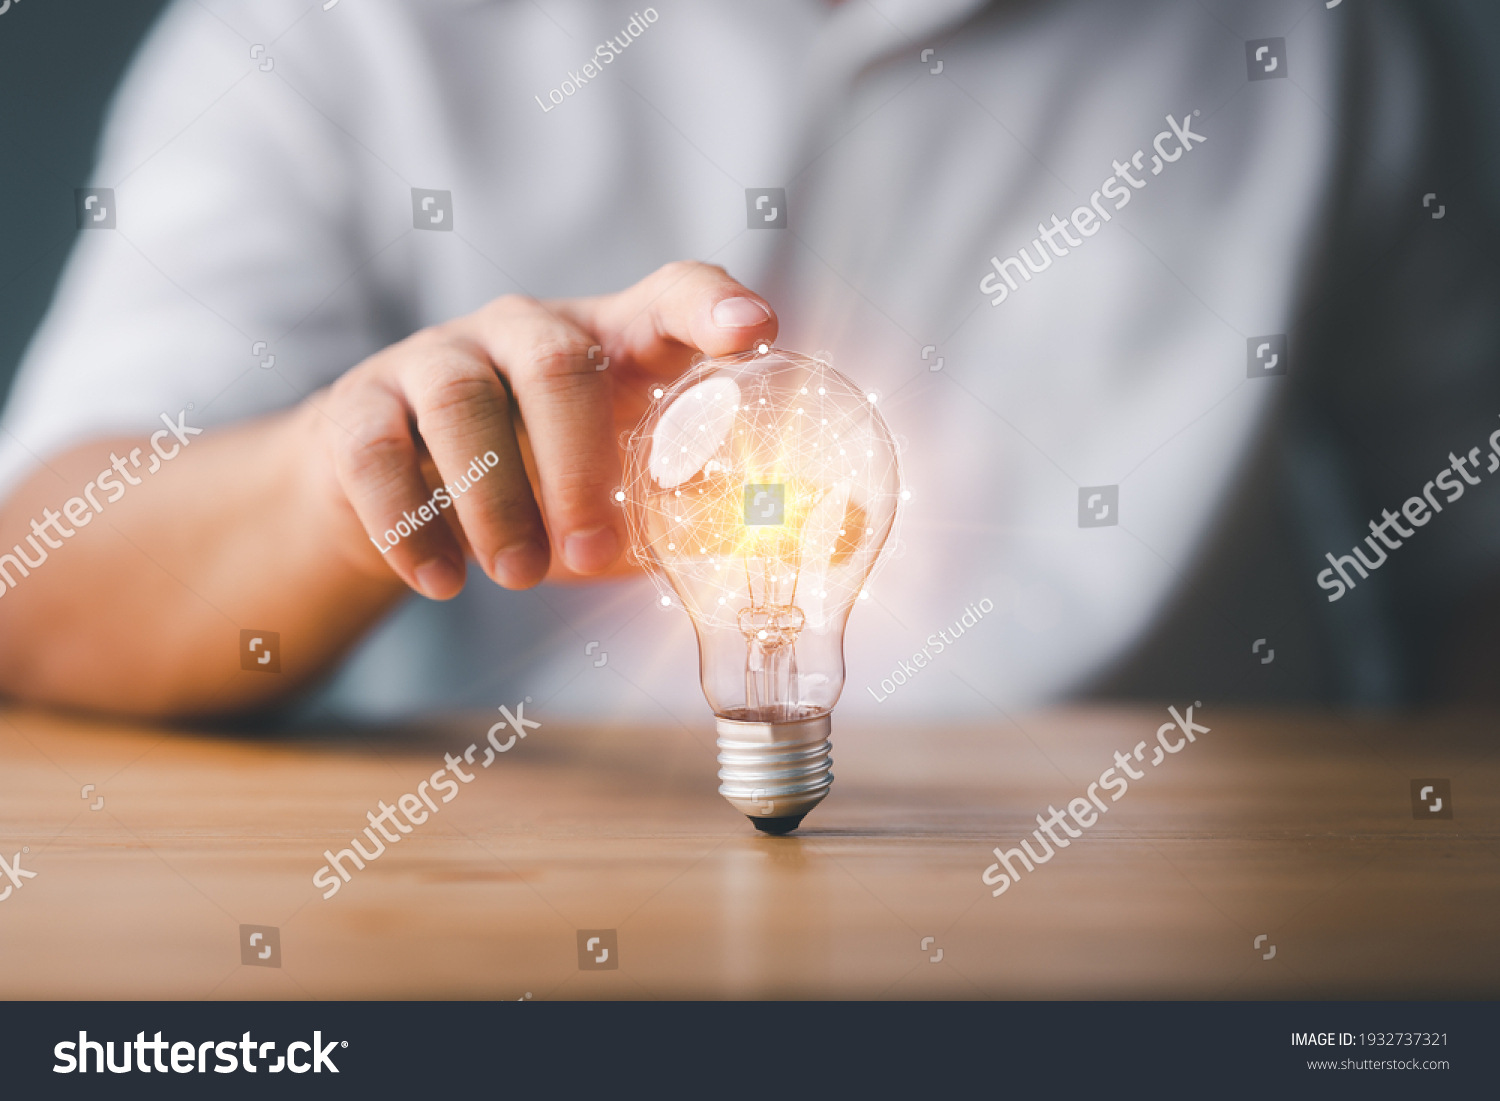 Businessman touching a bright light bulb. Concept of Ideas for presenting new ideas Great inspiration and innovation new beginning. #1932737321